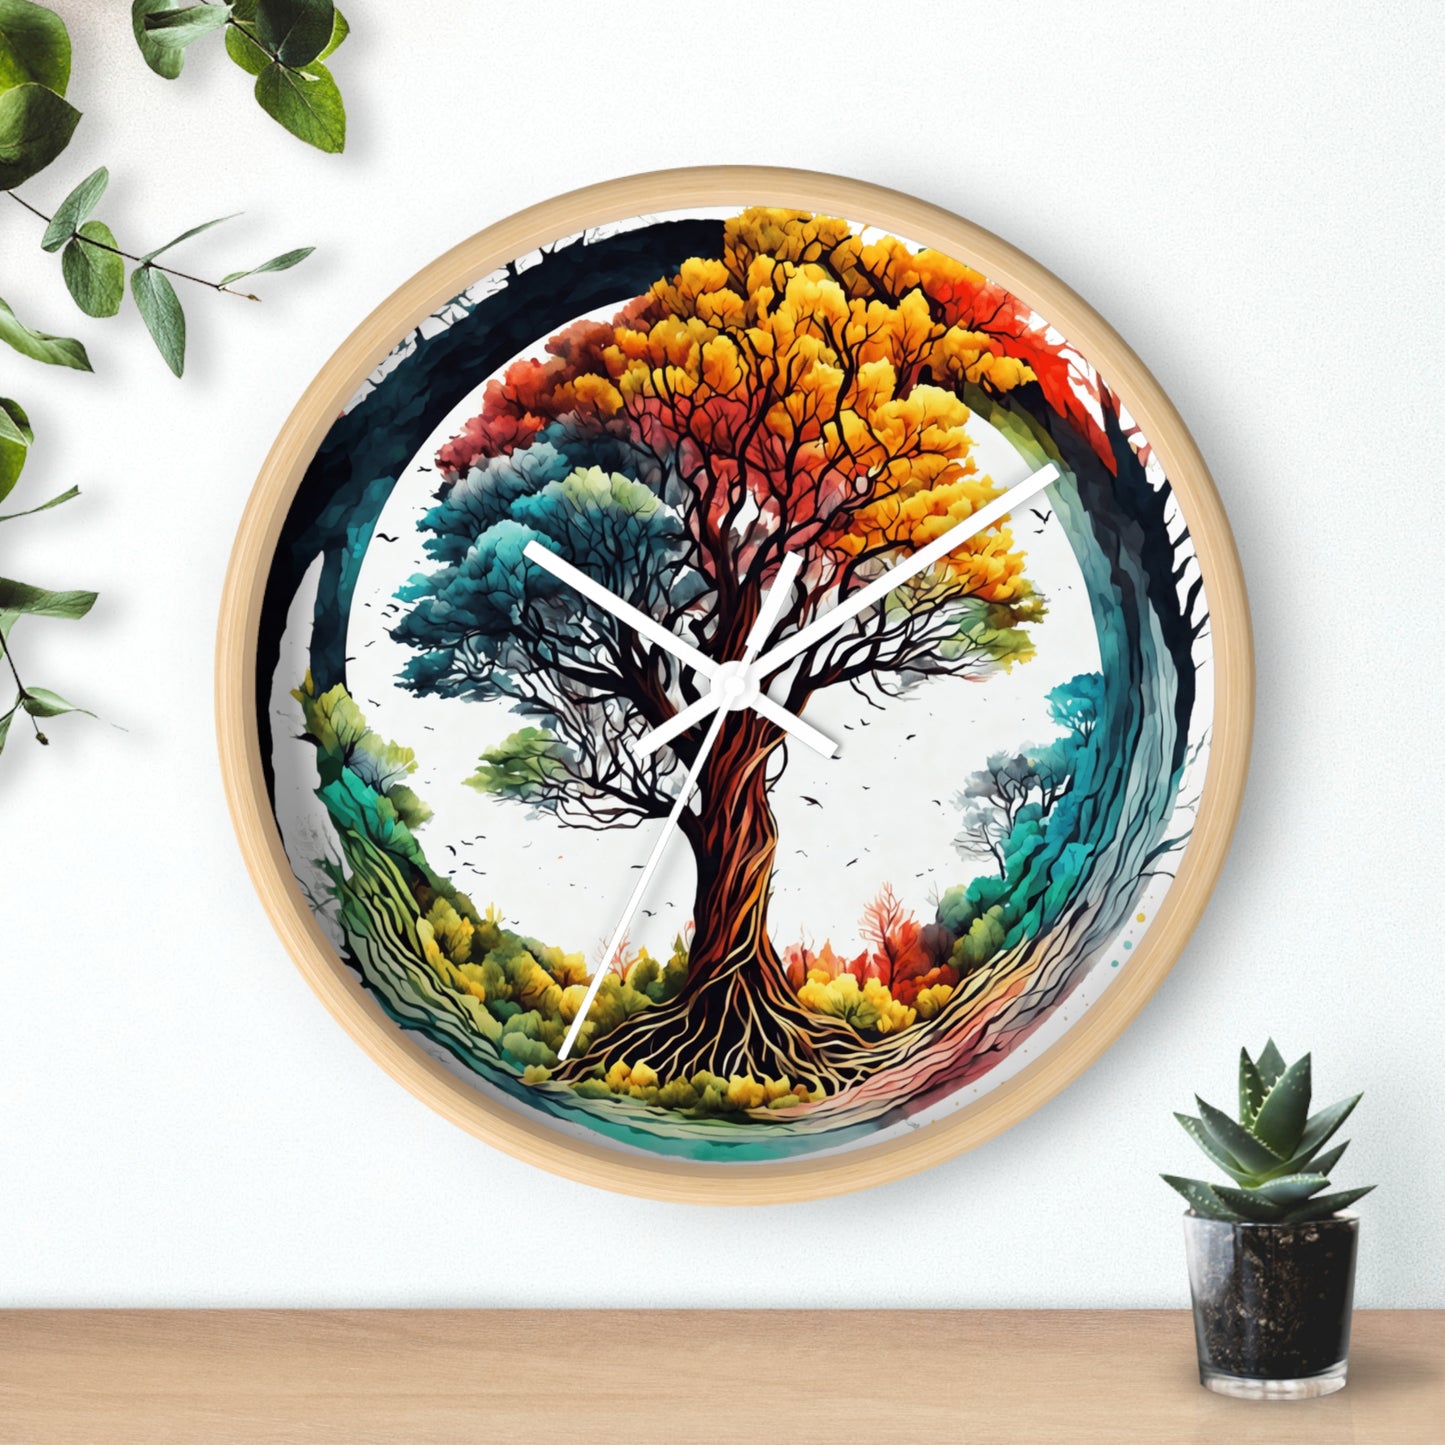 Colorful Tree of Life Wall Clock